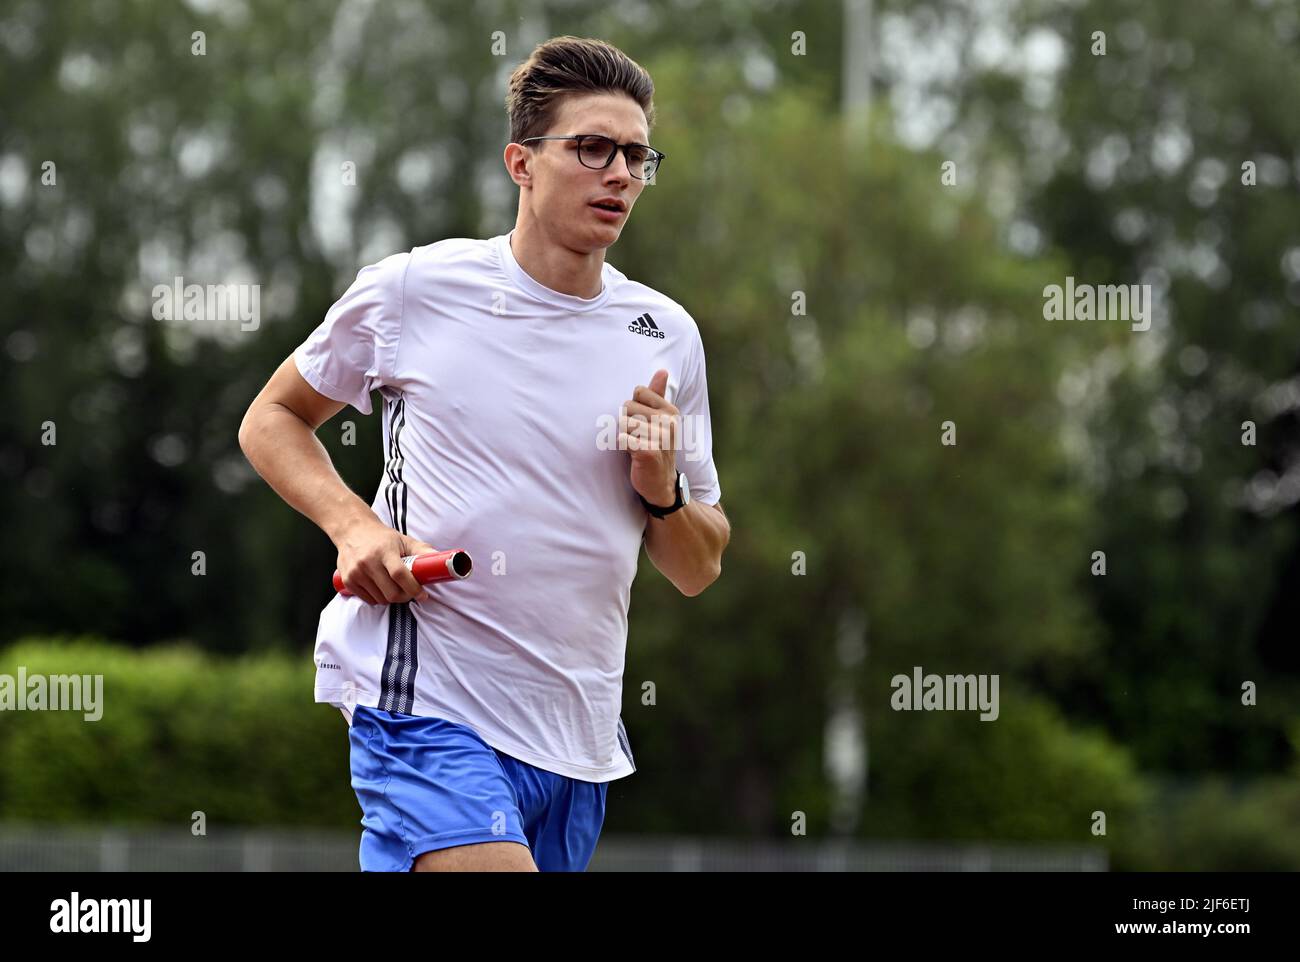 Christian Iguacel pictured during a training session of the Belgian 4x400m relay team 'Belgian Tornados', Thursday 30 June 2022 in Louvain-la-Neuve. The athletes are preparing for the 2022 World Championships in Eugene, Oregon, United States from July 15 to 24. BELGA PHOTO ERIC LALMAND Stock Photo